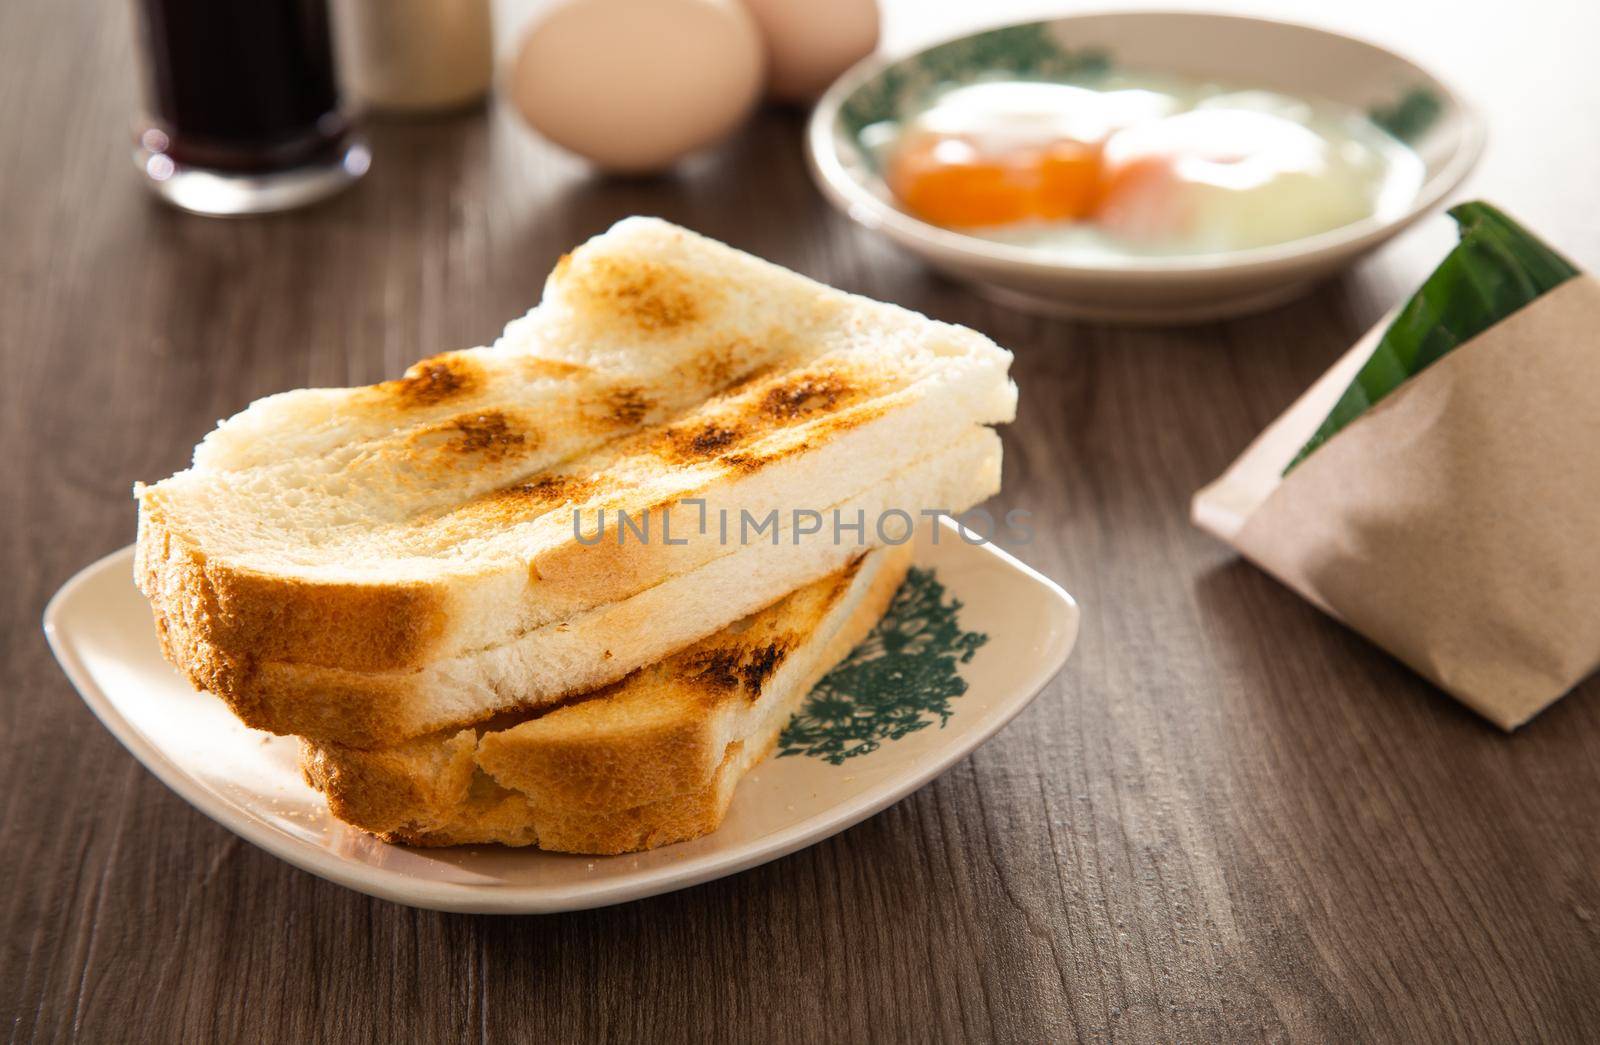 Oriental breakfast set in Malaysia consisting of coffee, nasi lemak, toast bread and half-boiled egg by tehcheesiong